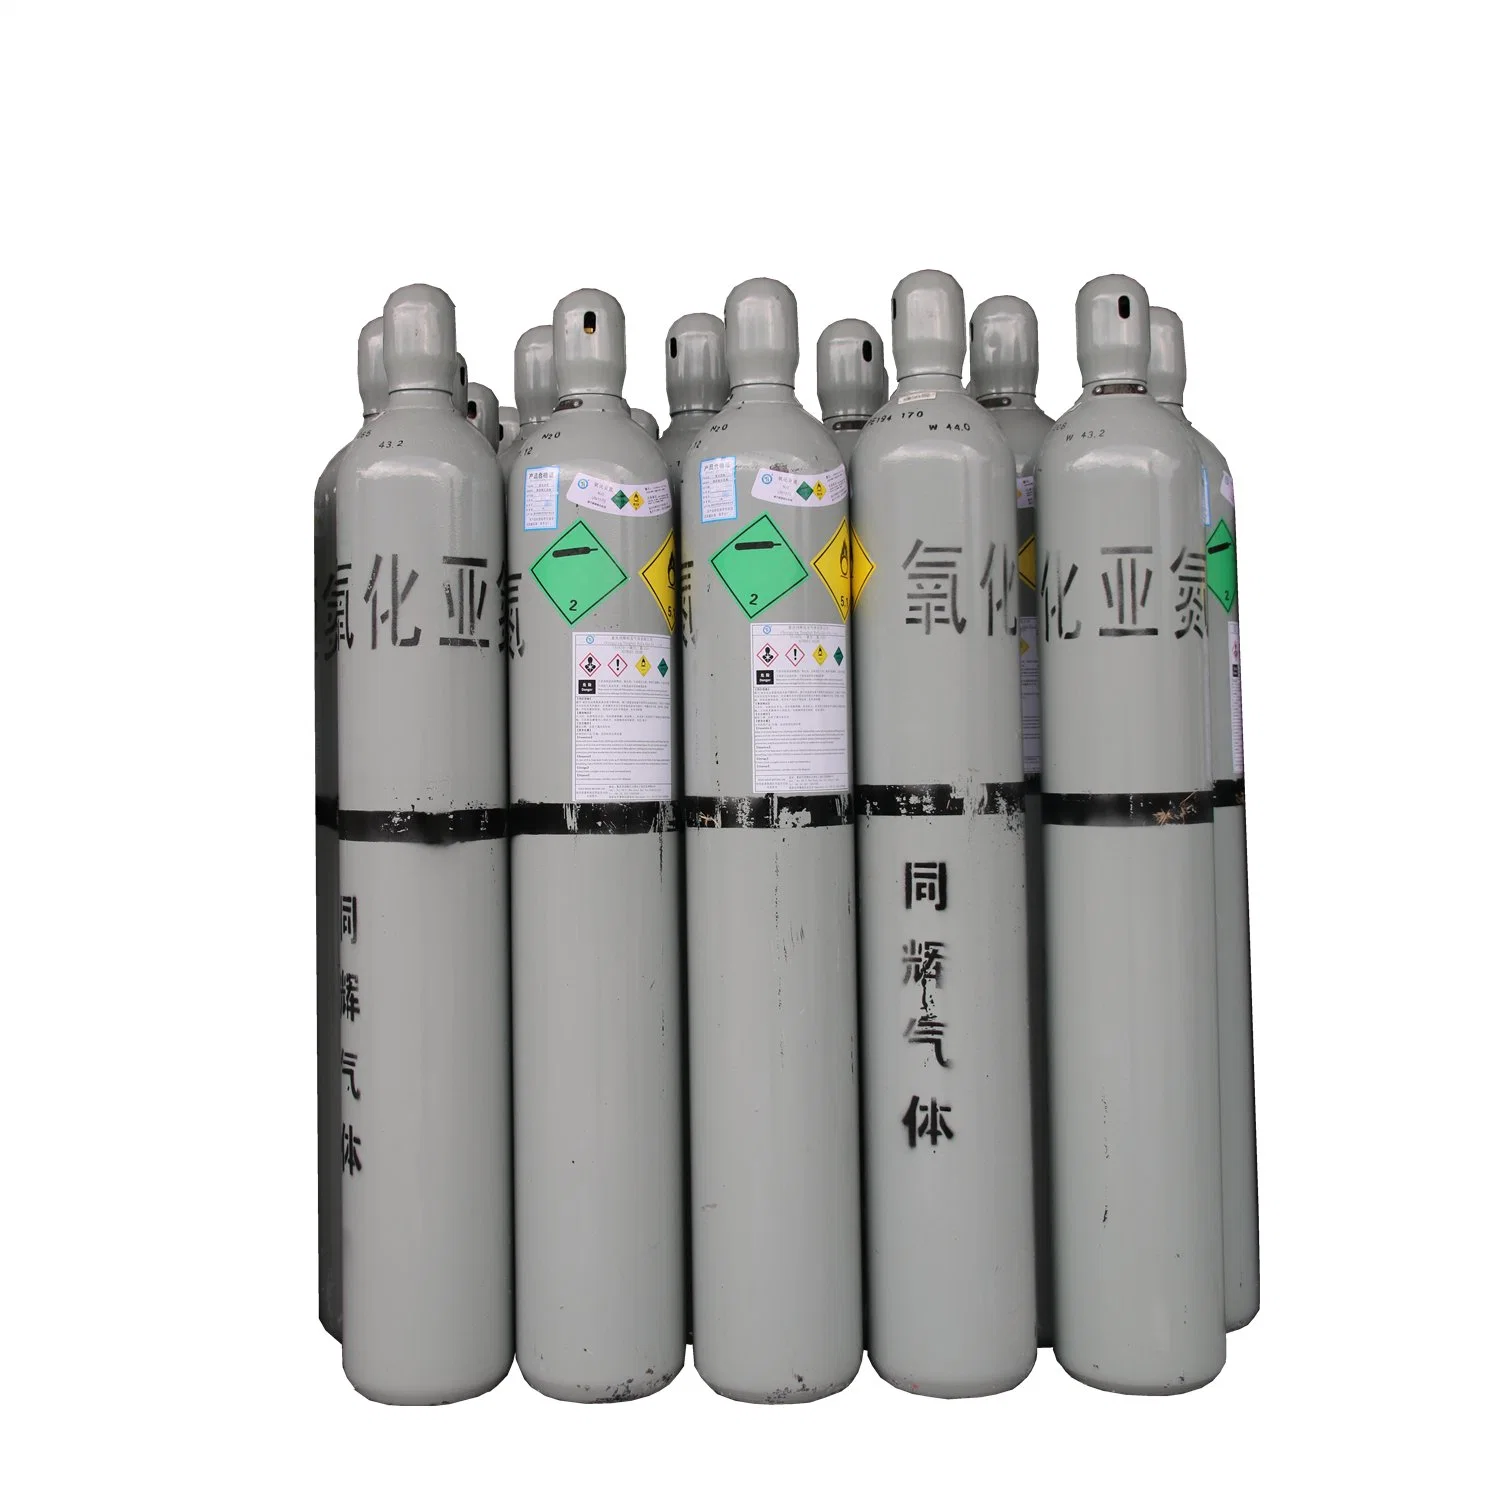 Medical Laughing Gas 47L Laughing Gas Filling Cylinder for Dental Sedation